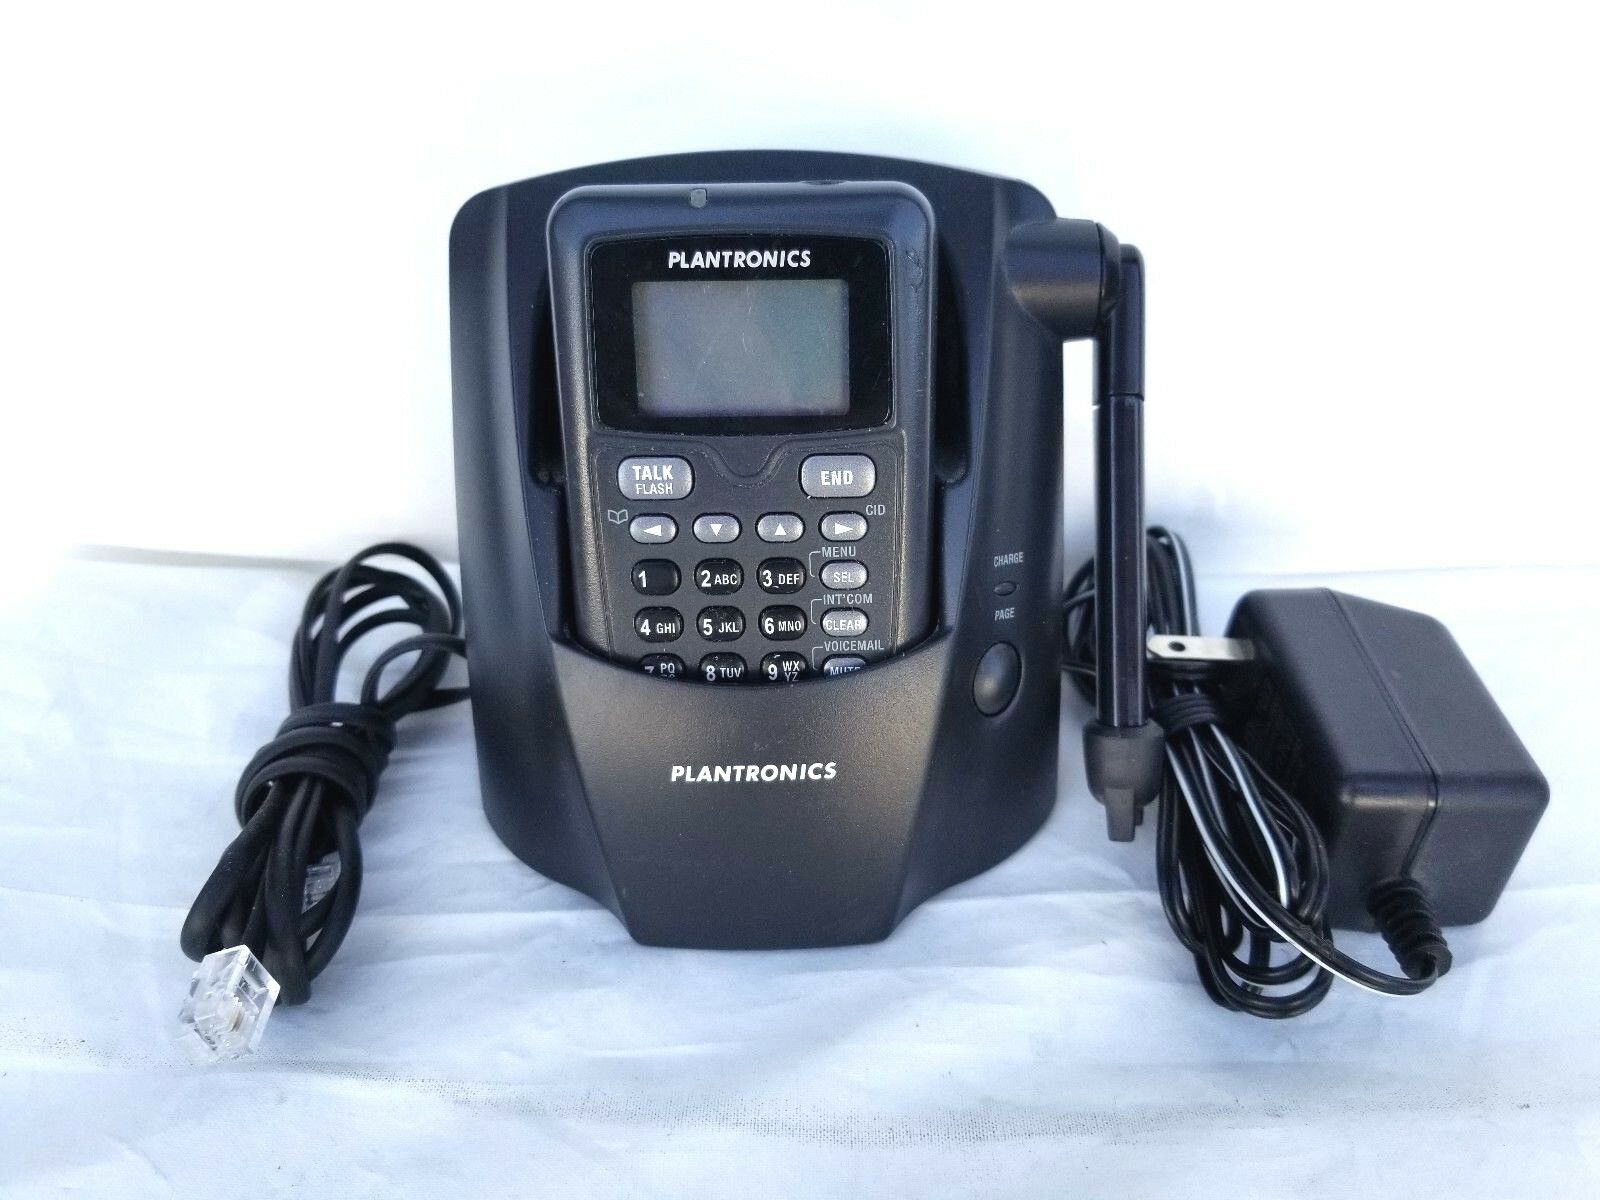 Plantronics CT14 DECT CORDLESS HEADSET PHONE WITH MAIN BASE AND AC - REFURBISHED.